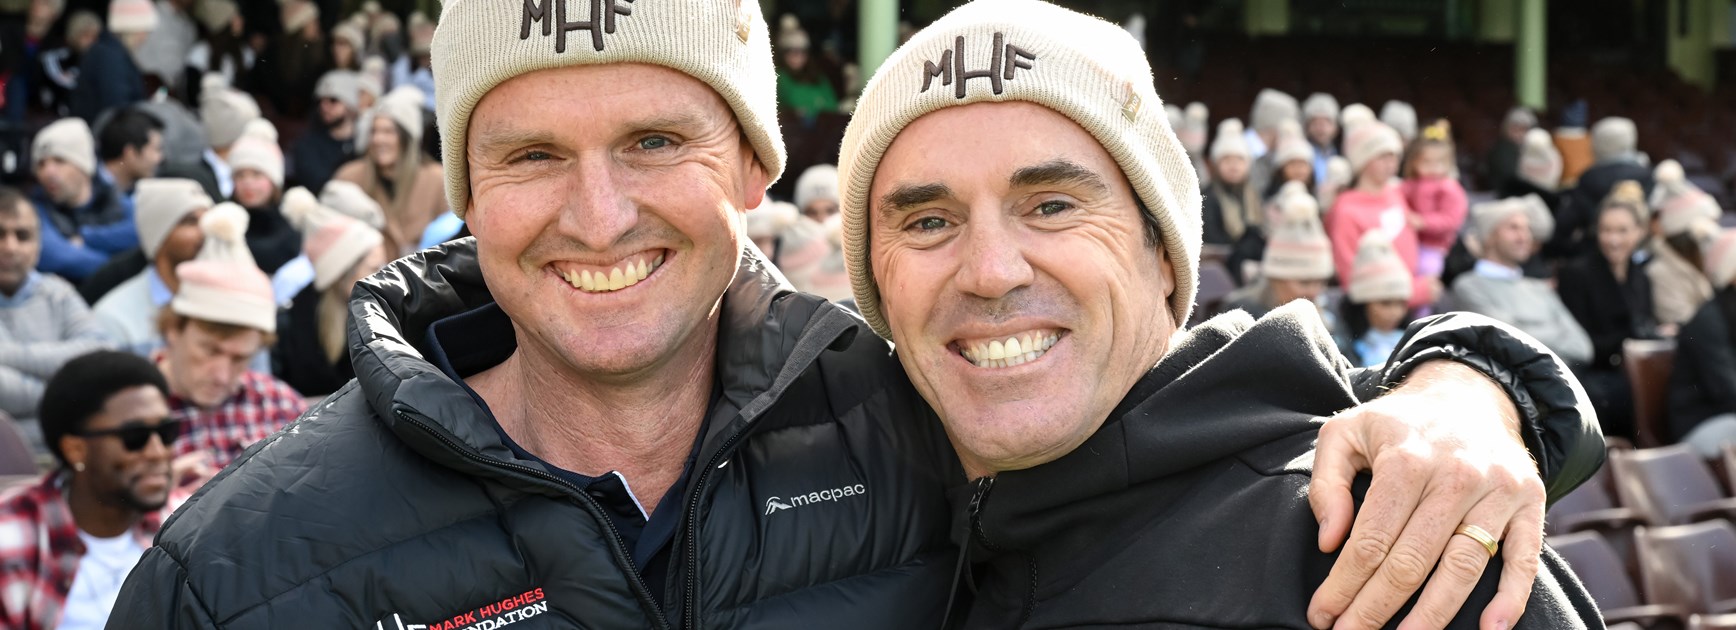 Hughes continuing to inspire with Beanie for Brain Cancer